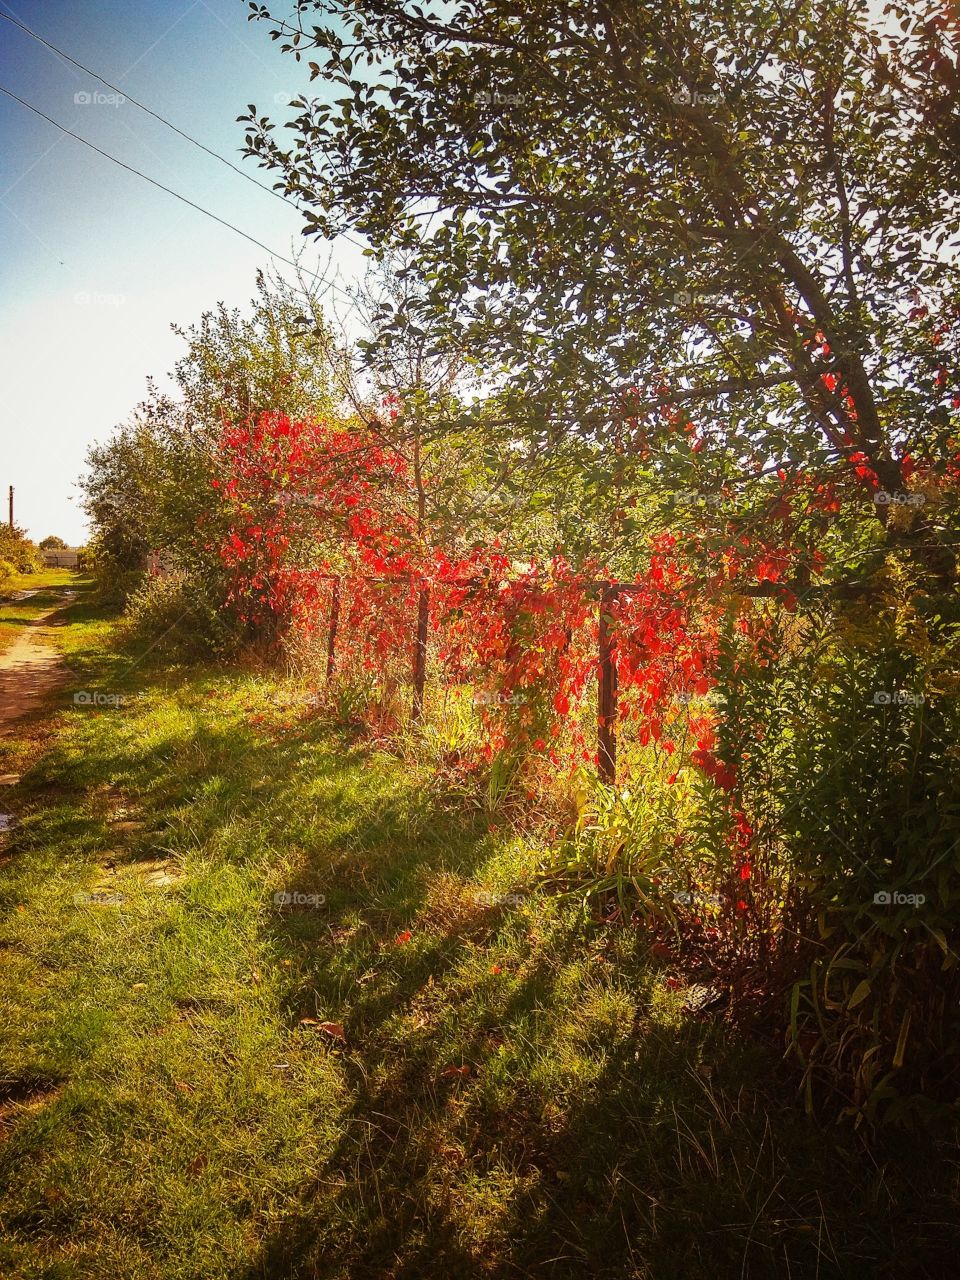 Autumn day at the cottage. The fence, overgrown with vines and glowing under the rays of the sun.